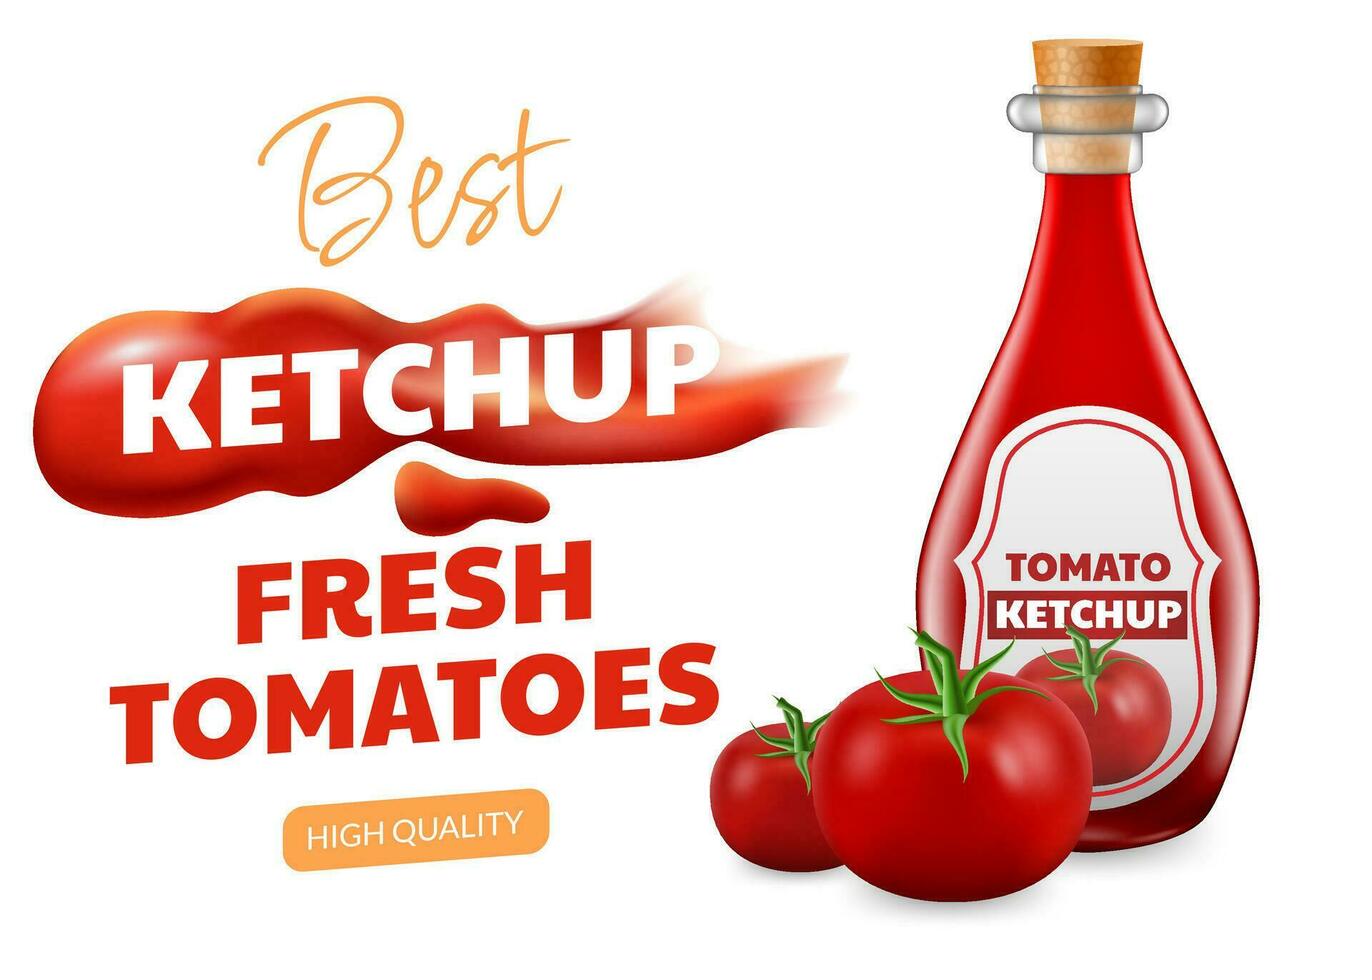 Realistic 3D vector illustration of a glass bottle with vibrant and tasty ketchup. The image showcases the liquid sauce dripping and forming a stain. For ads, banners, or packaging designs